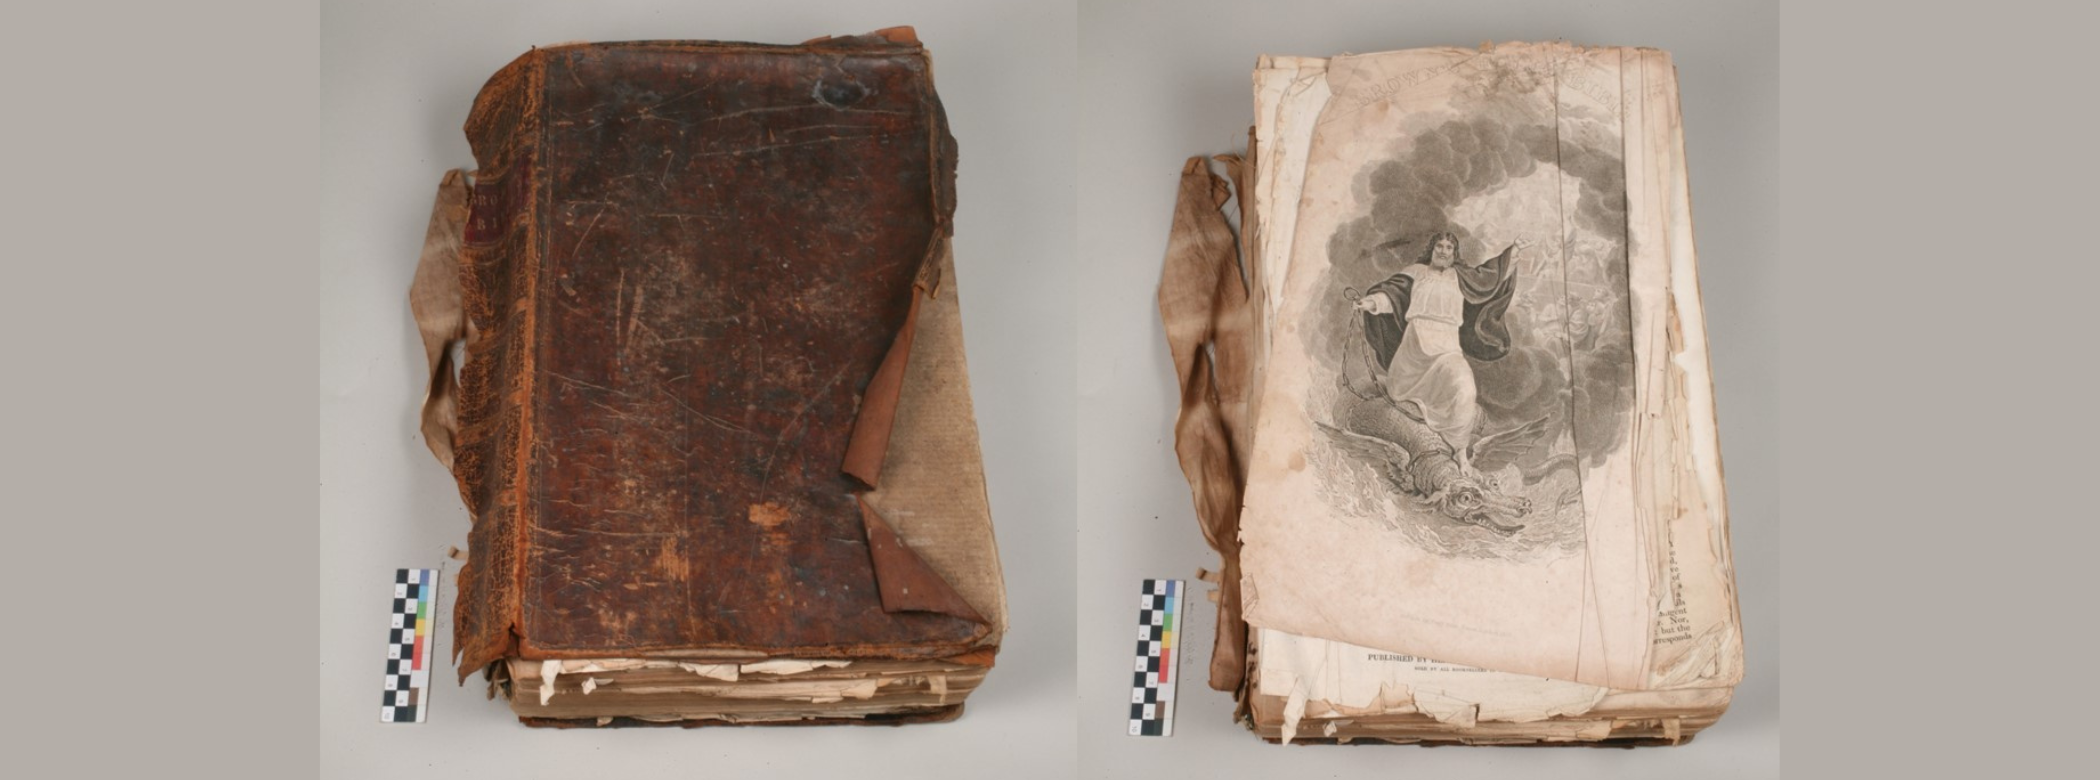 Two photos side-by-side. On the left, a very worn closed book with a peeling brown cover and broken spine. On the right, the same book with it’s cover removed, showing an illustrations of a person descending from the clouds on the back of a kind of winged serpent.